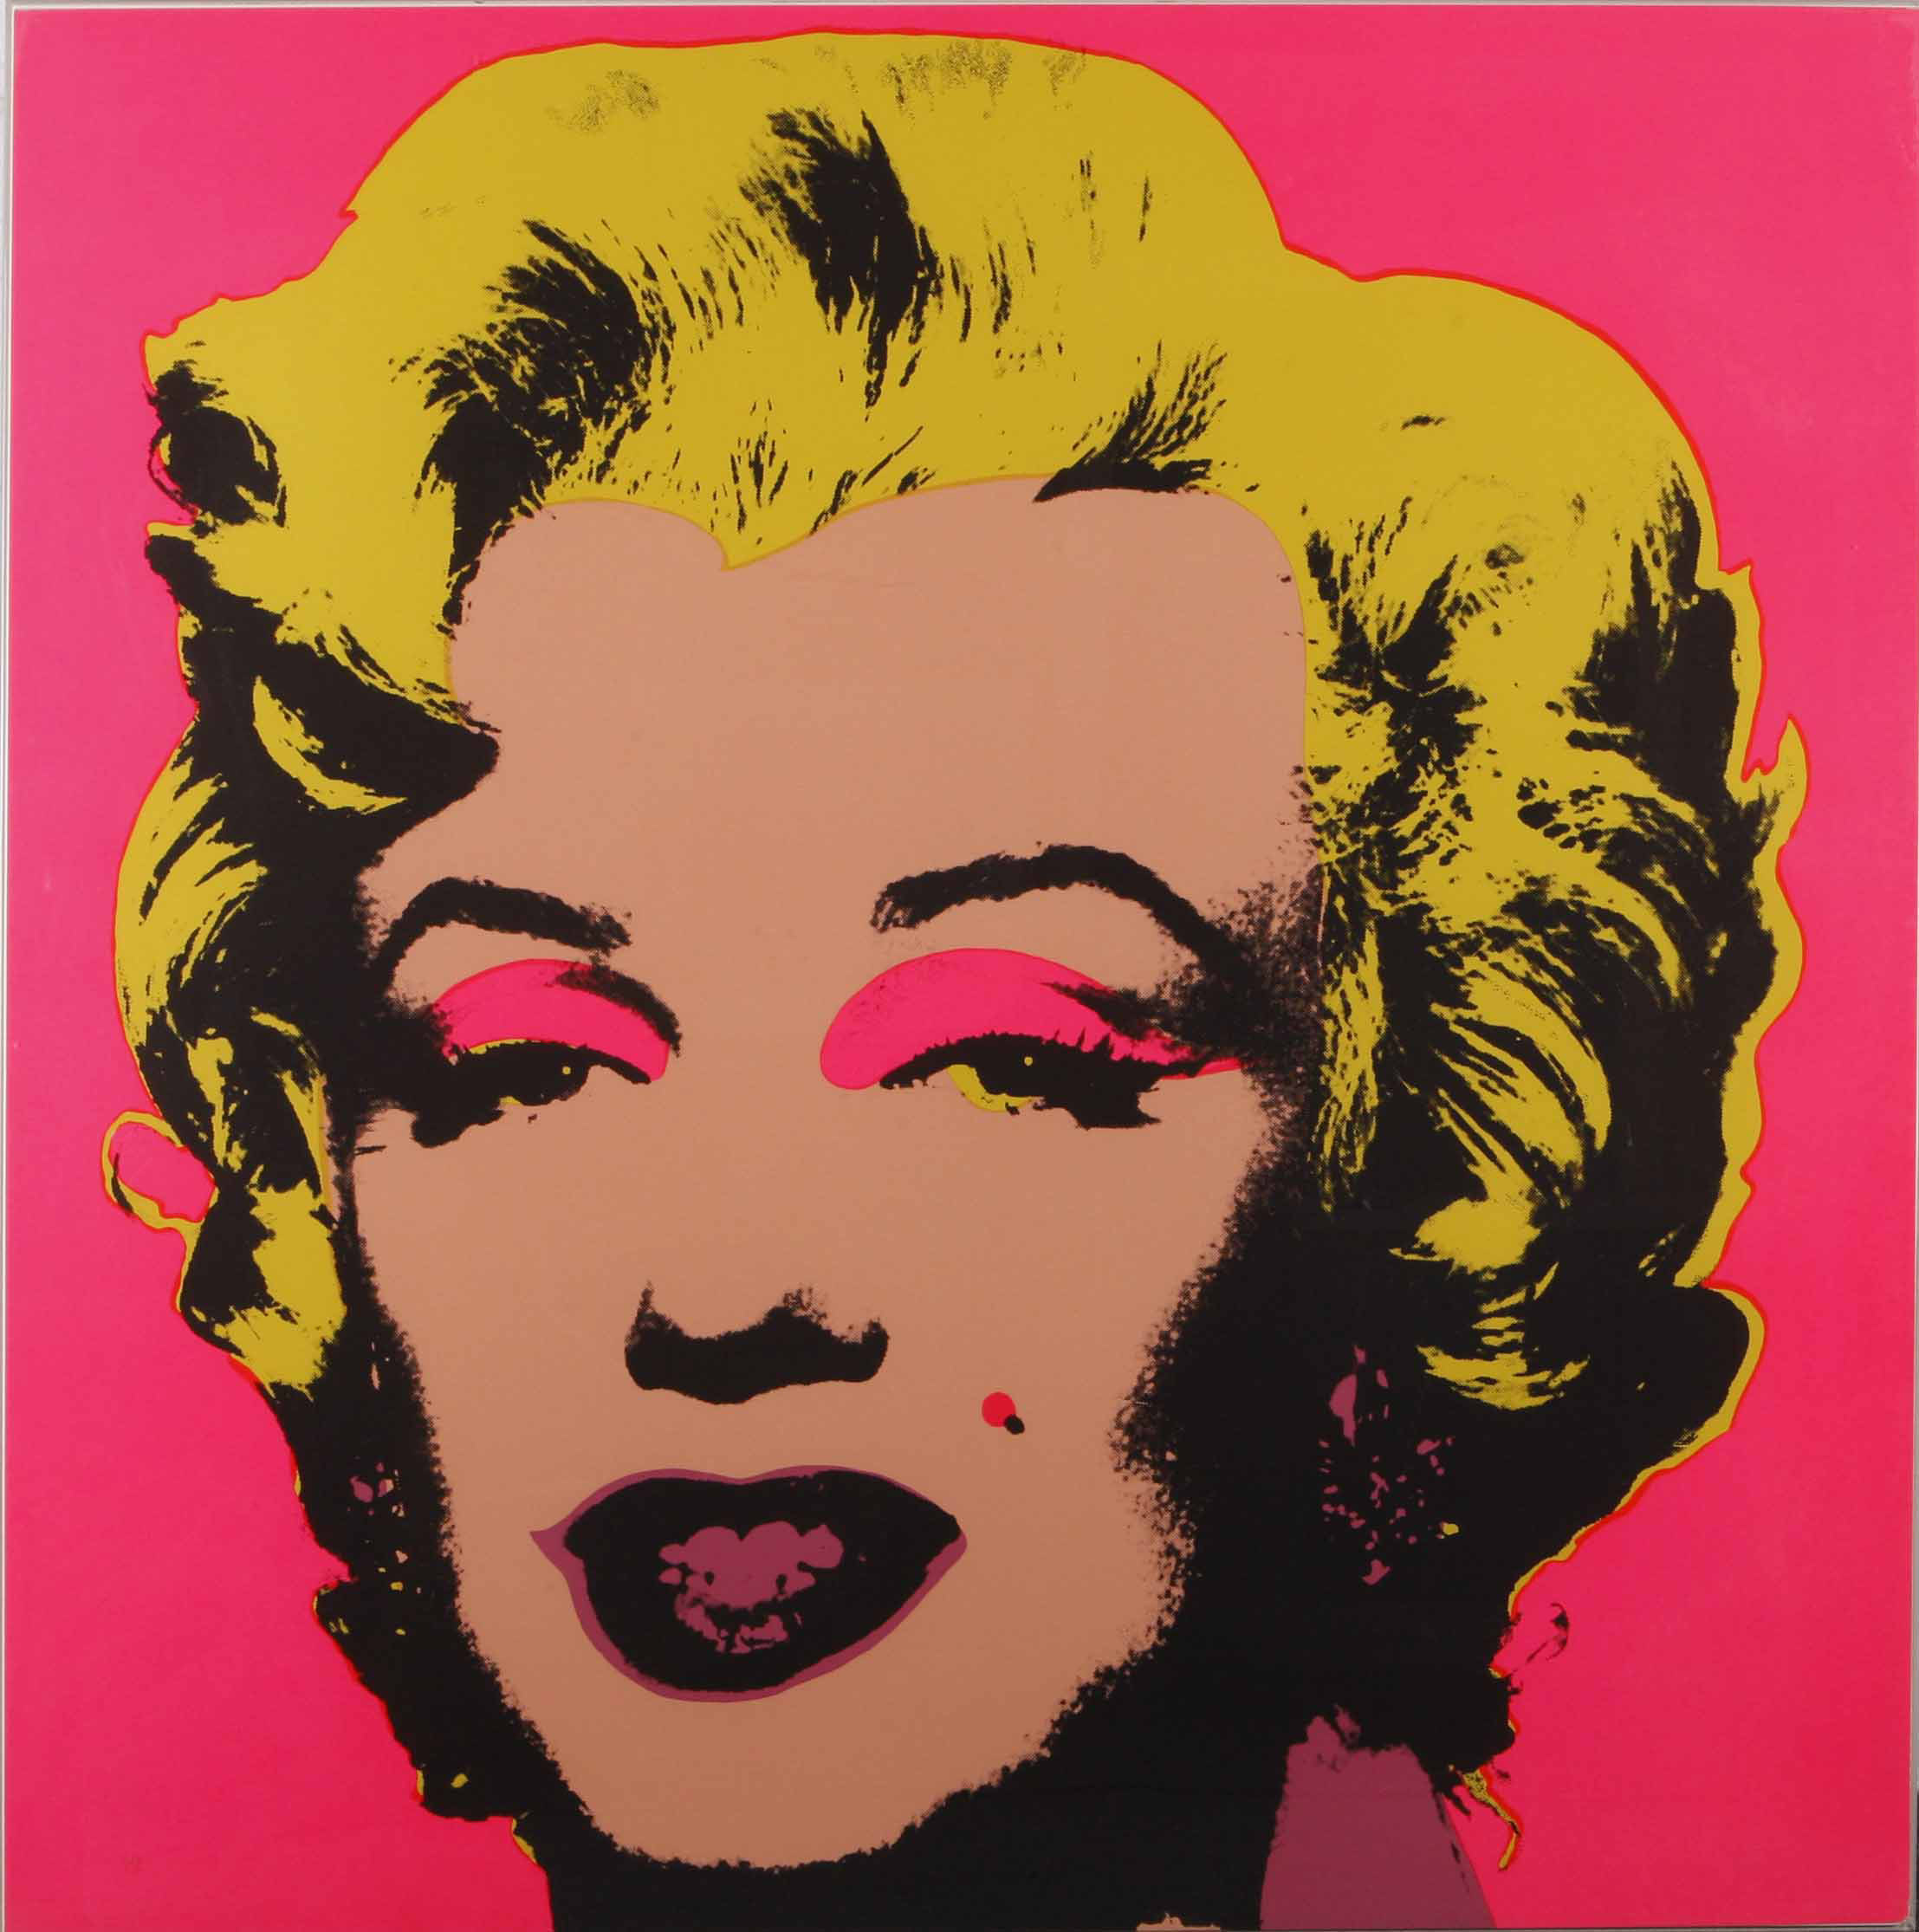 After Andy Warhol (1928-1987), Marilyn Portfolio published by Sunday b Morning, 1980s, 10 screen